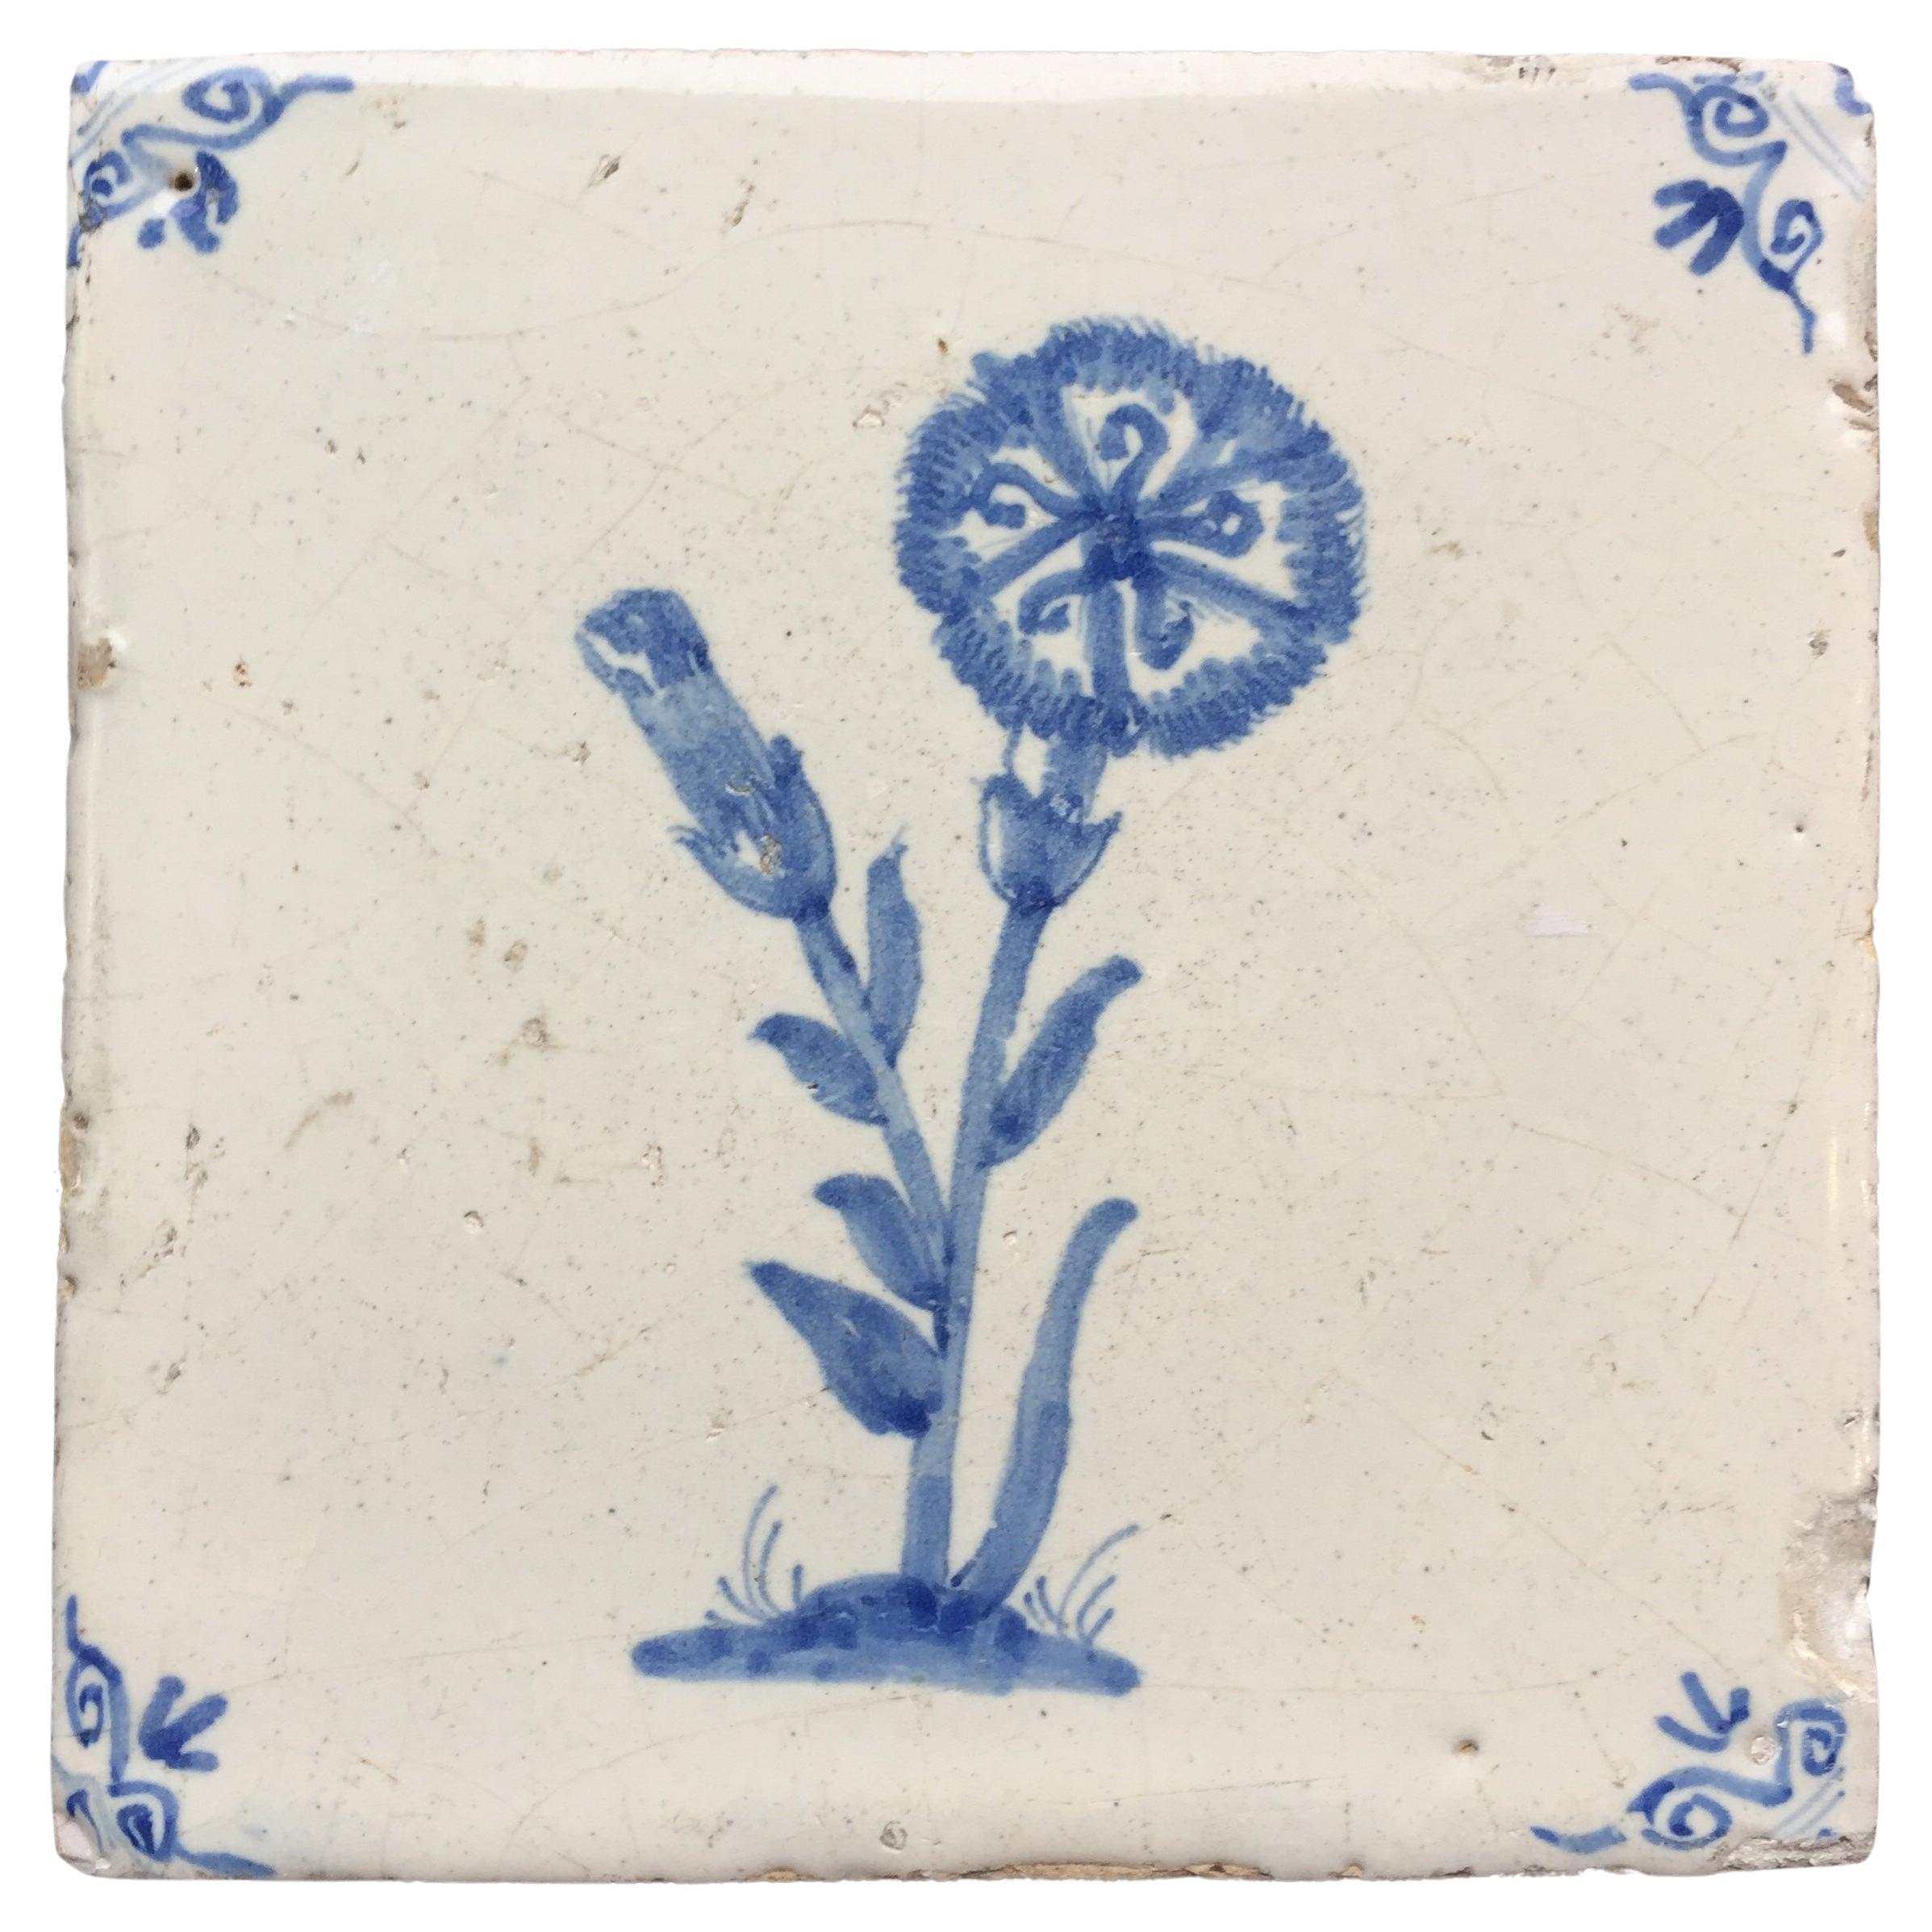 Blue and White Dutch Delft Tile with Carnation, 17th Century